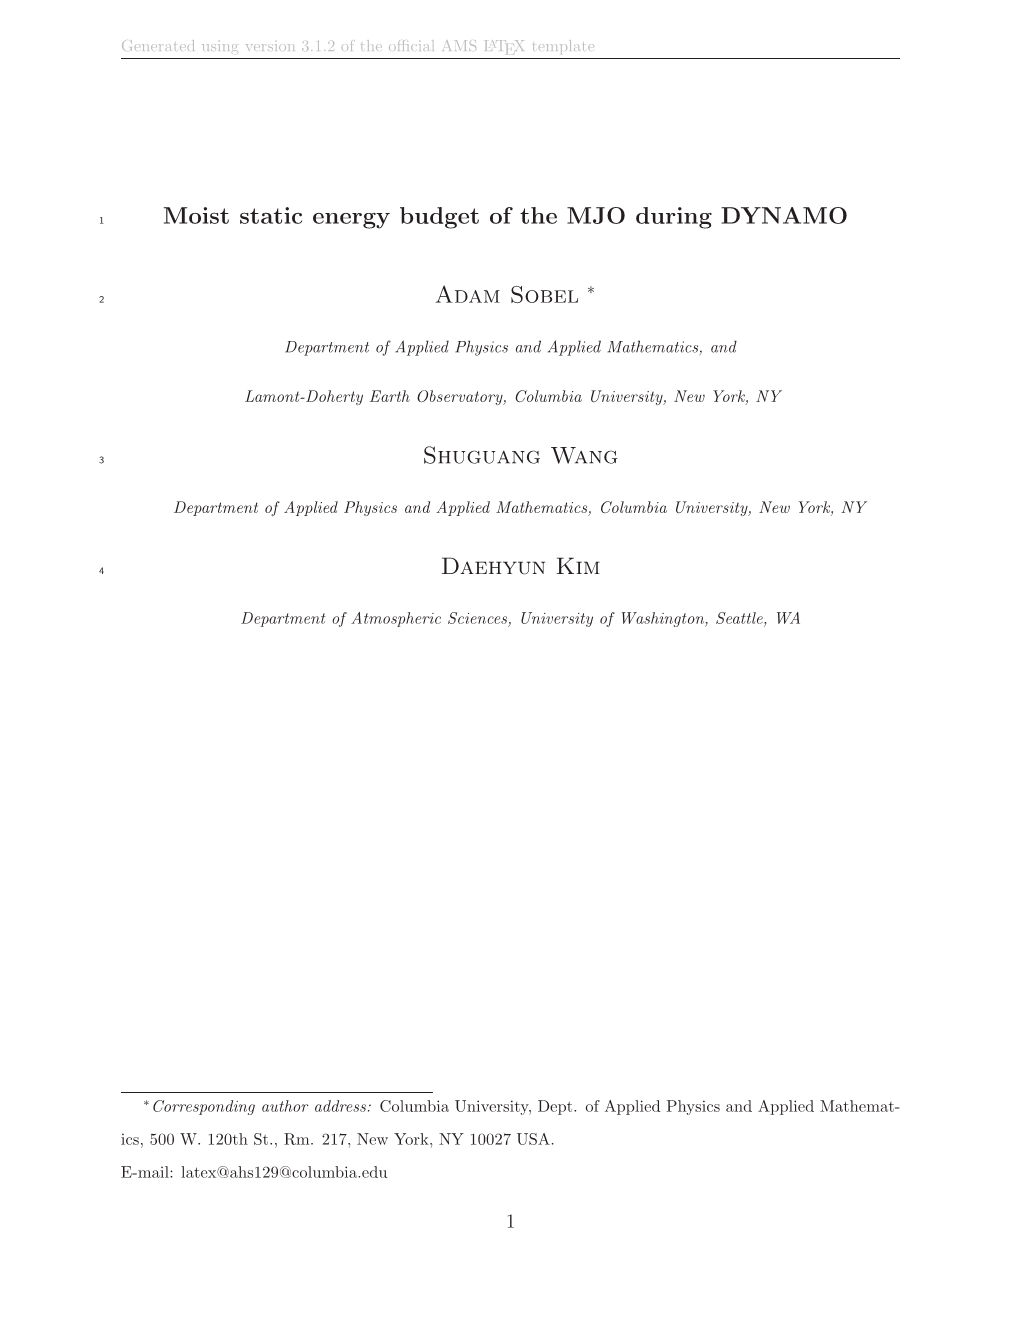 Moist Static Energy Budget of the MJO During DYNAMO